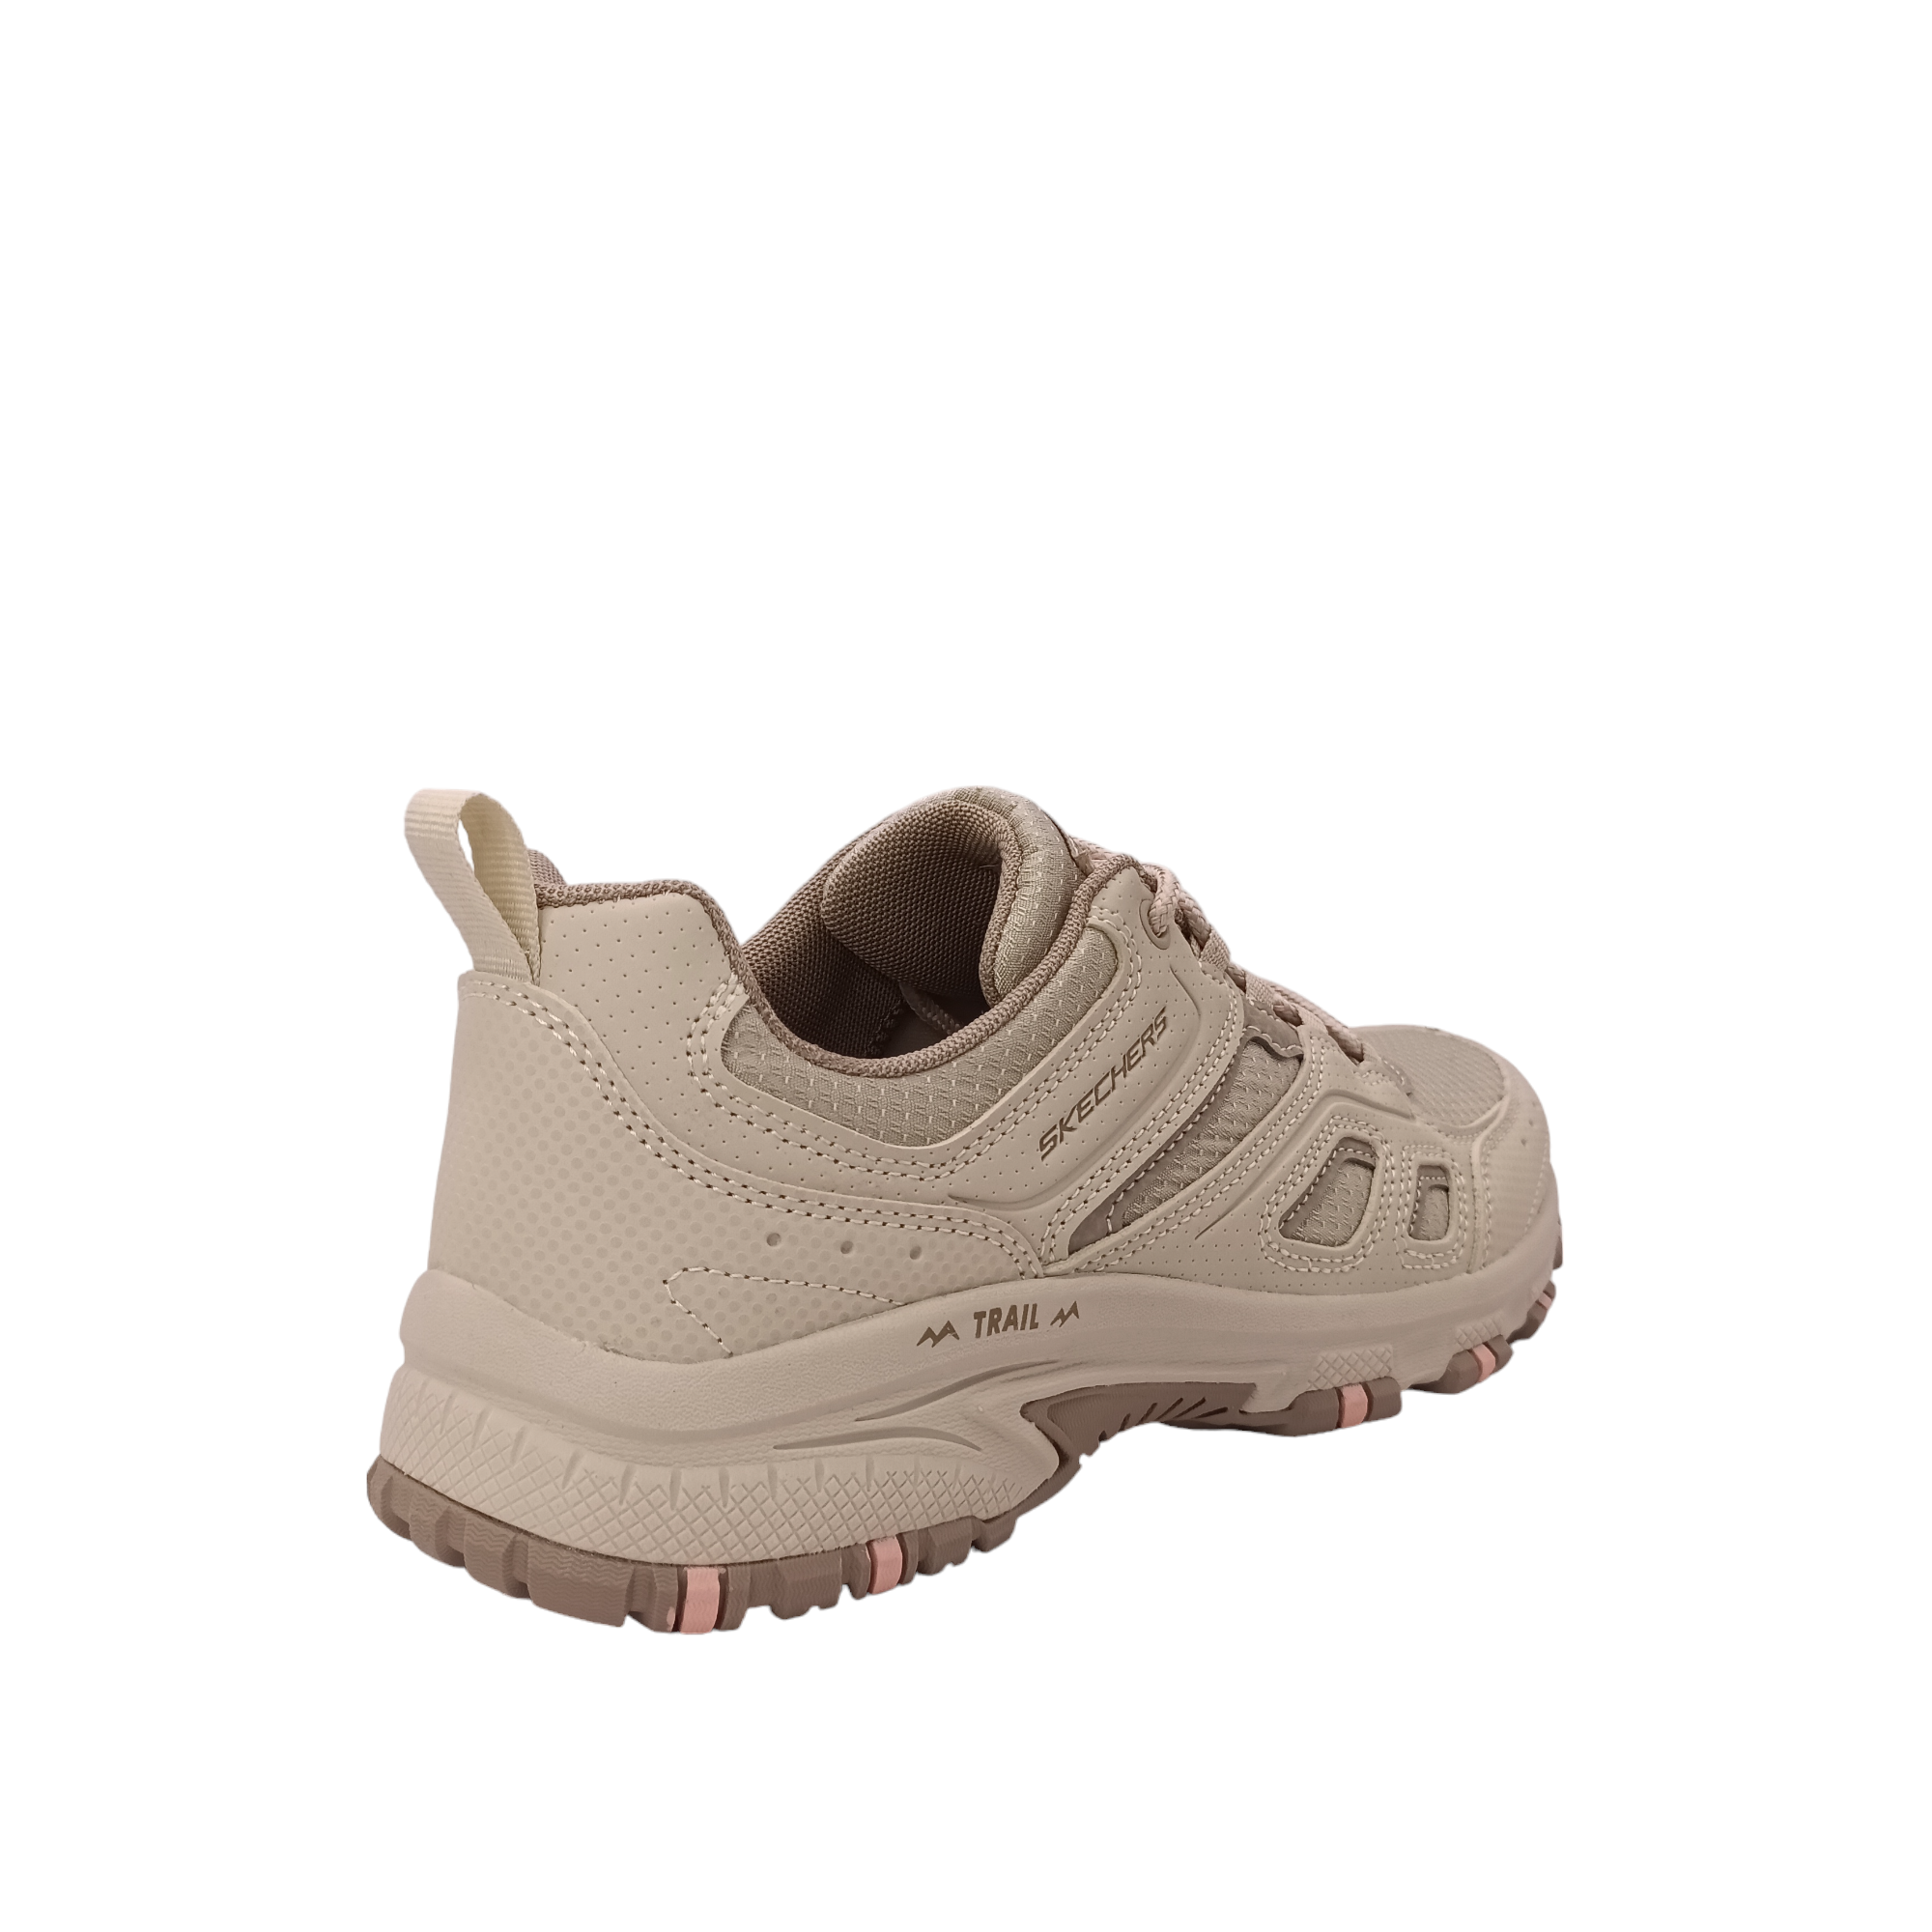 Shop Pathway Finder Skechers - with shoe&amp;me - from Skechers - Sneakers - Sneakers, Winter, Womens - [collection]